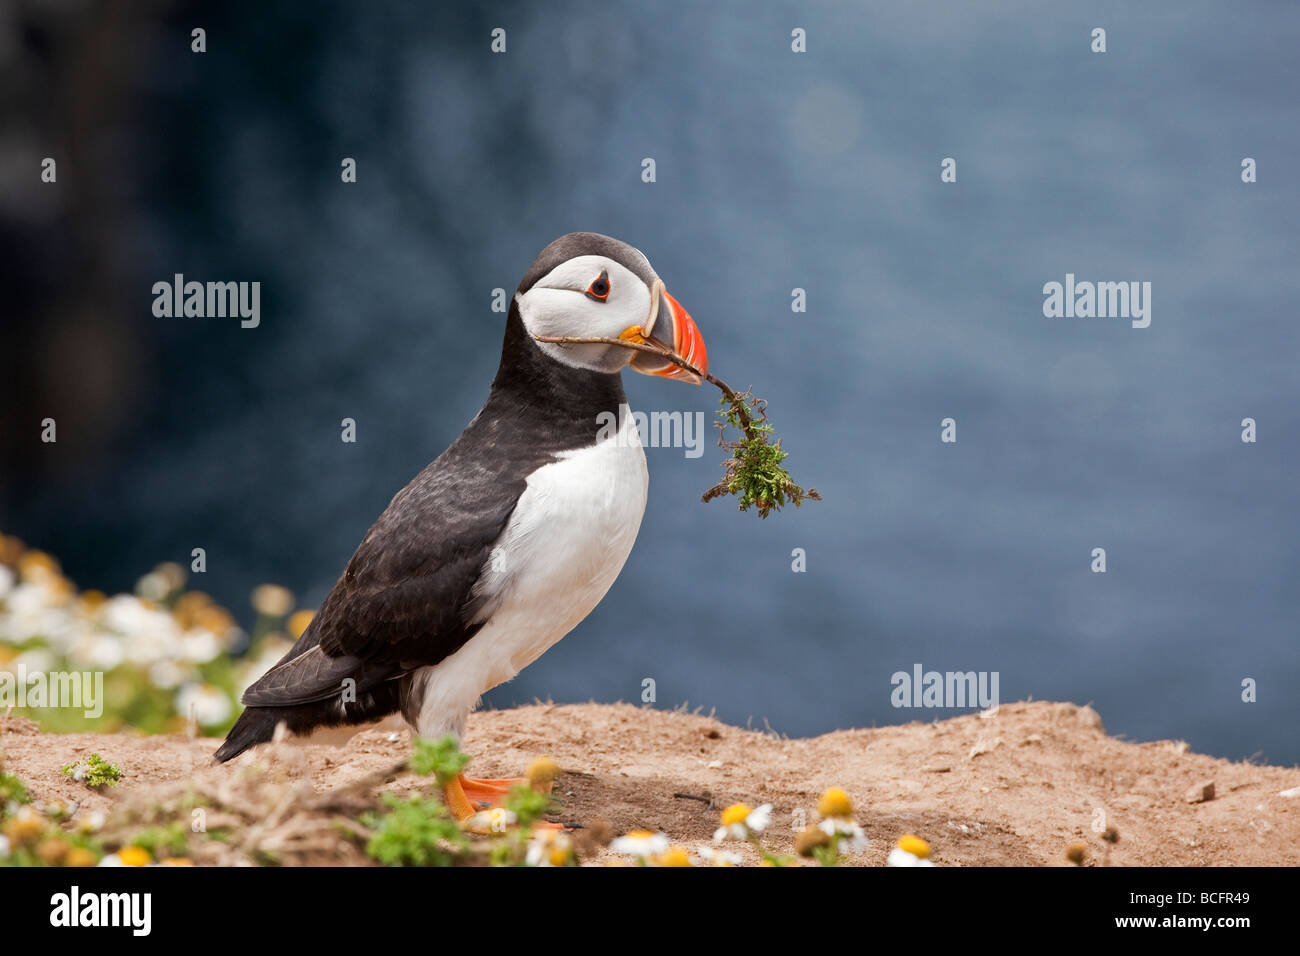 Puffin with twig in its beak Stock Photo